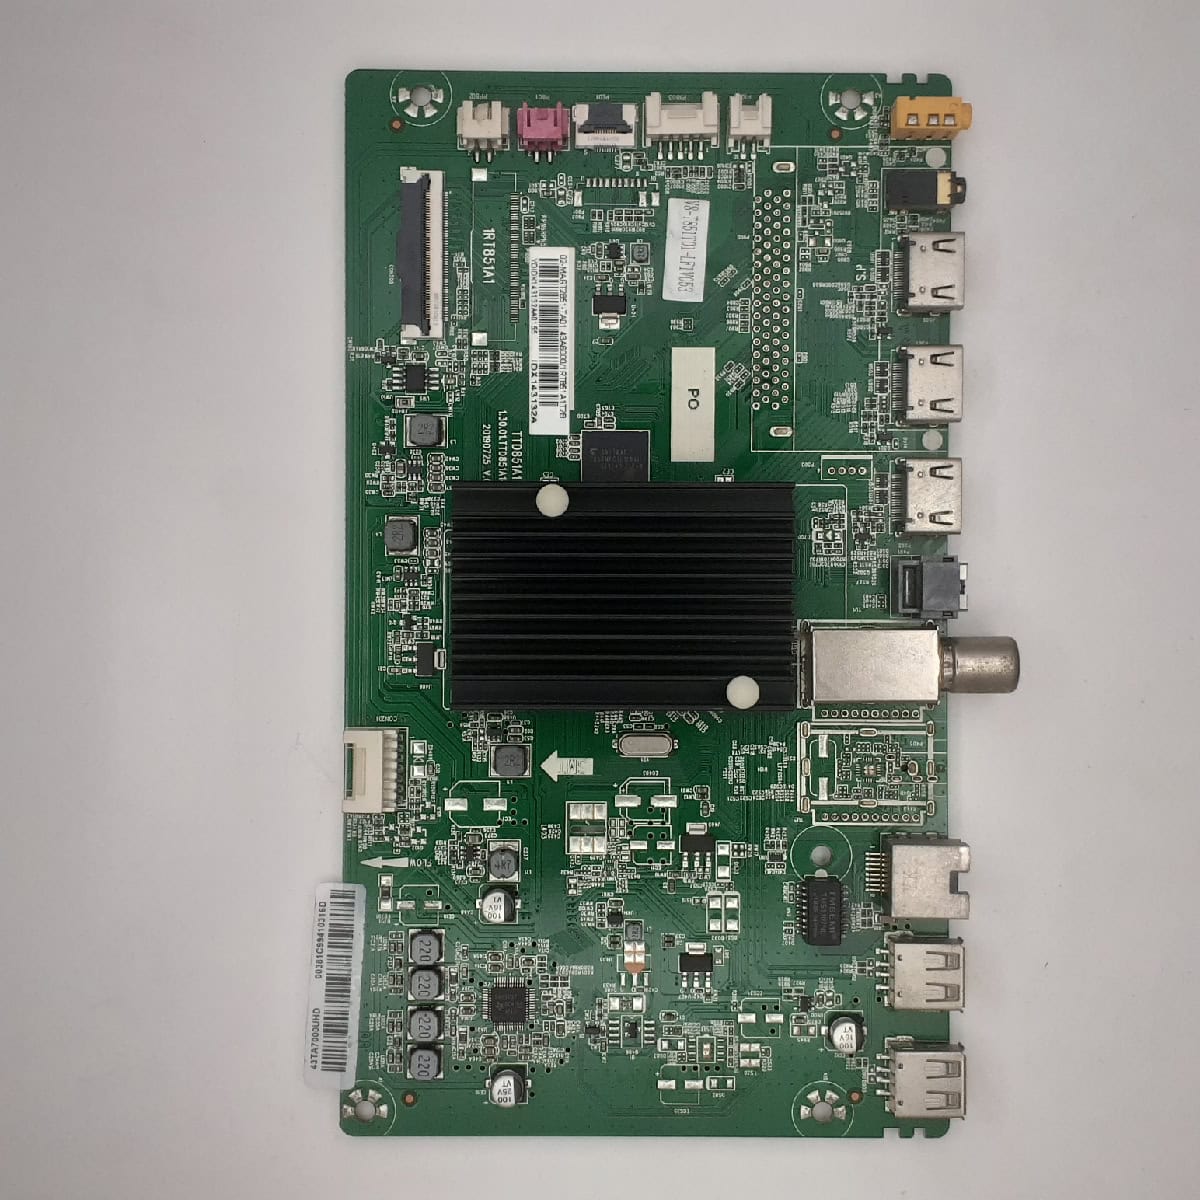 43TA7000UHD MICROMAX MOTHERBOARD FOR LED TV